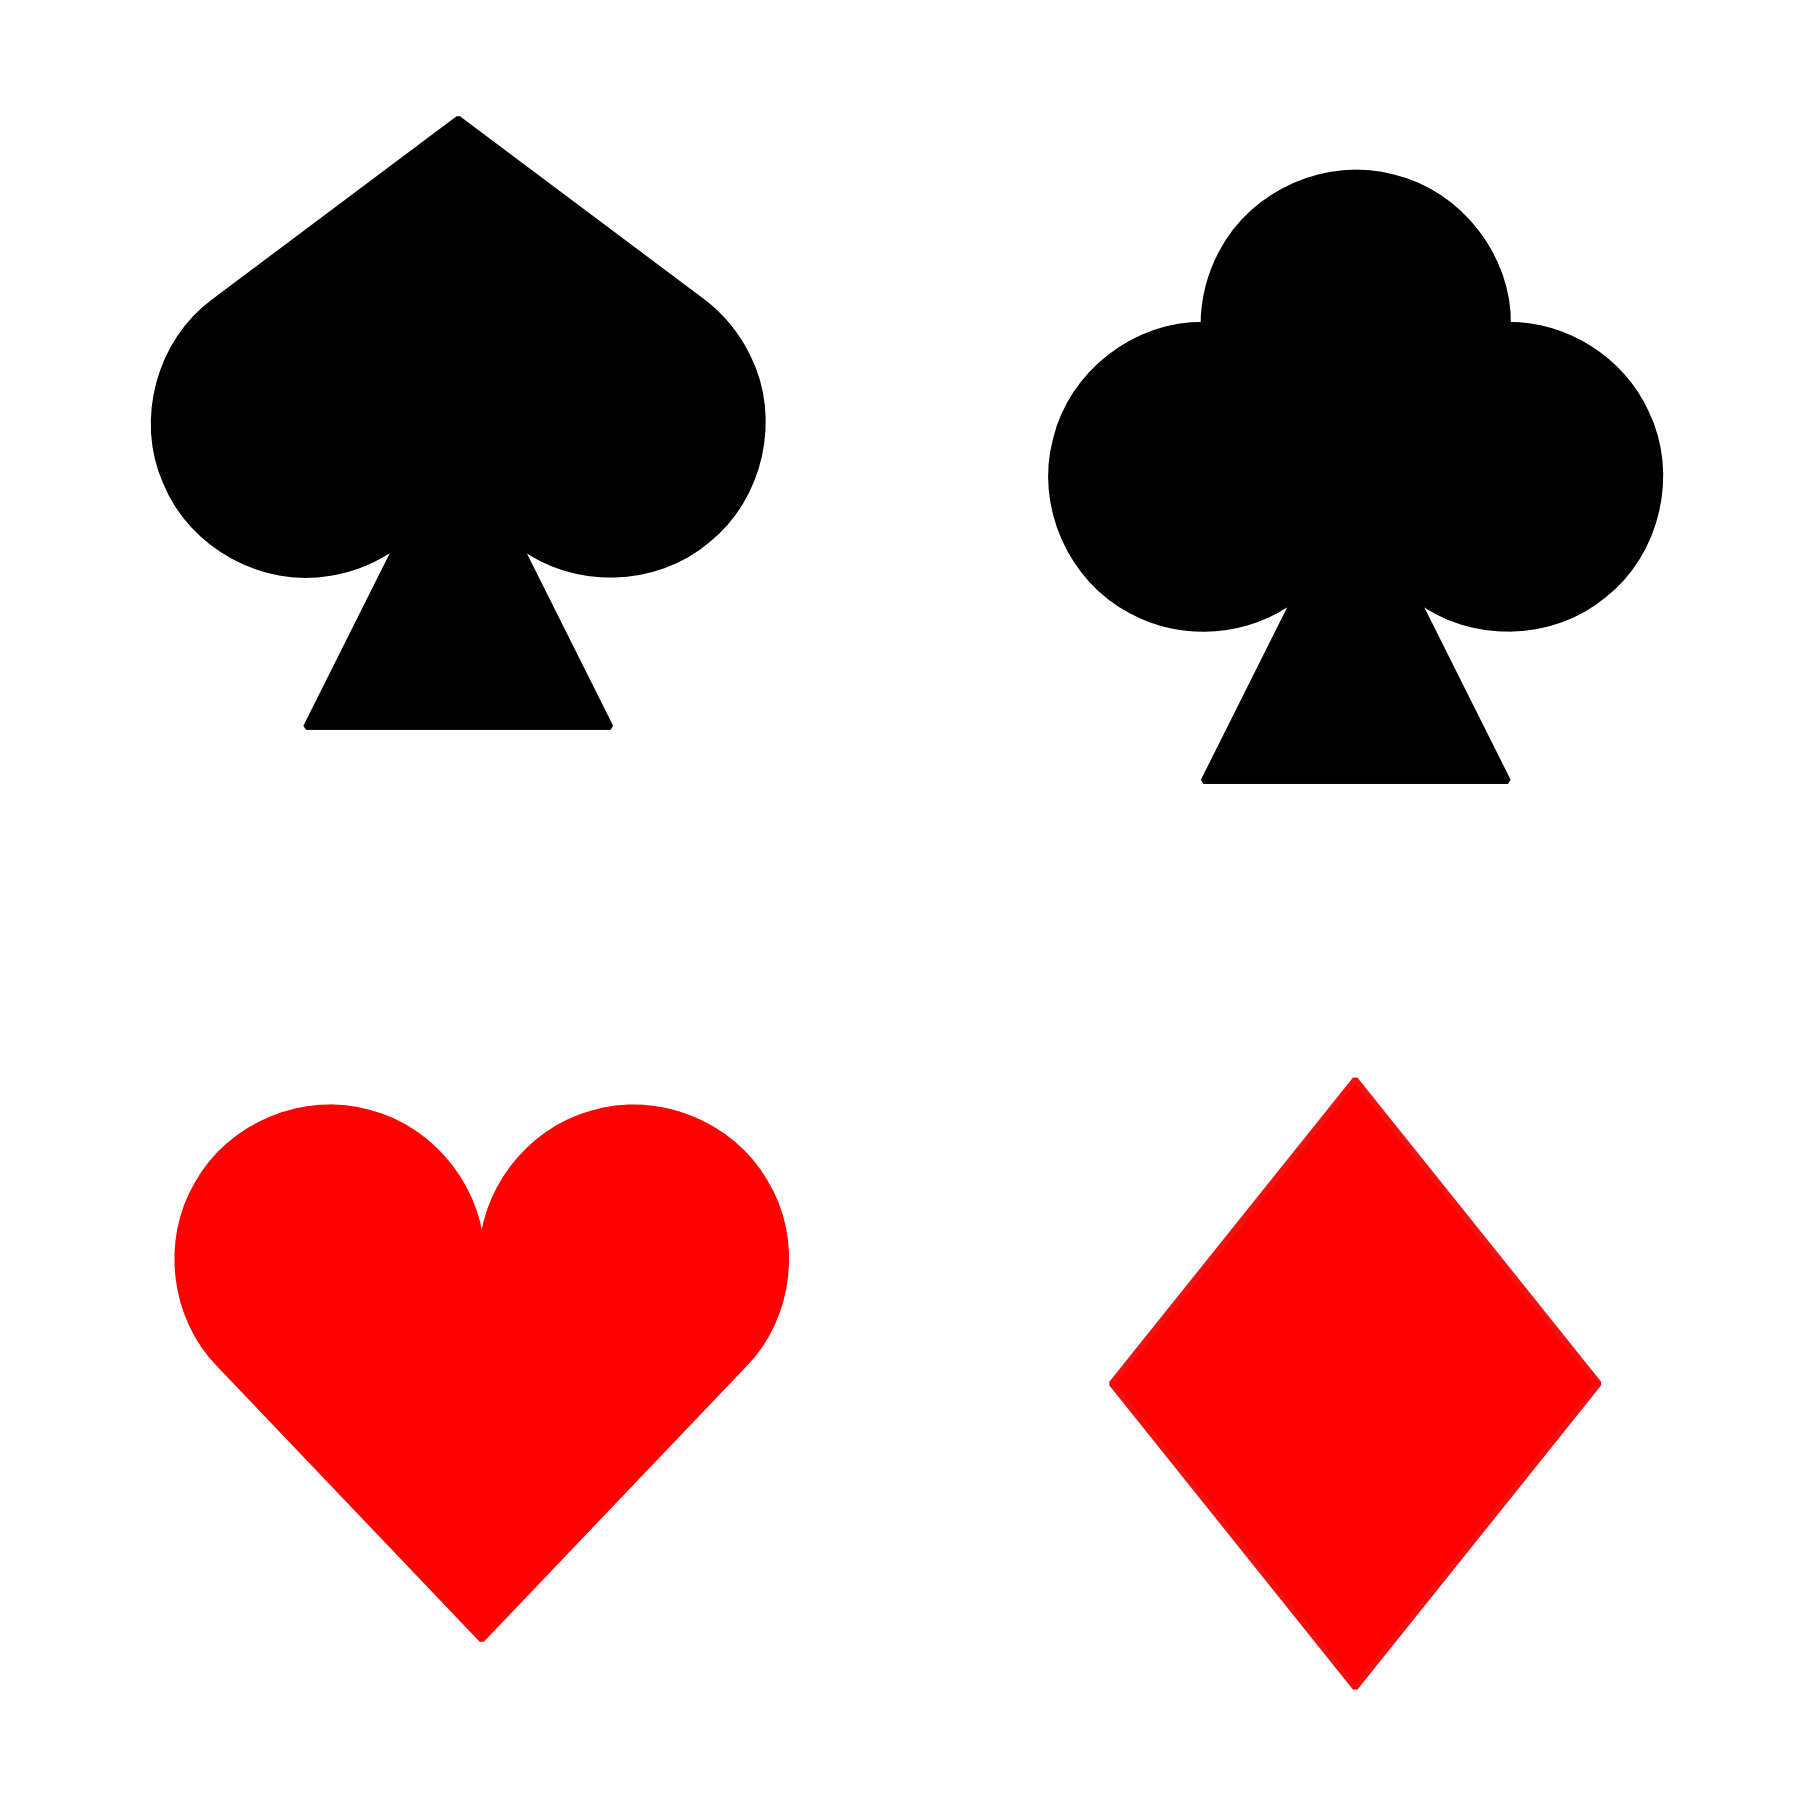 Playing Card Suits - ClipArt Best